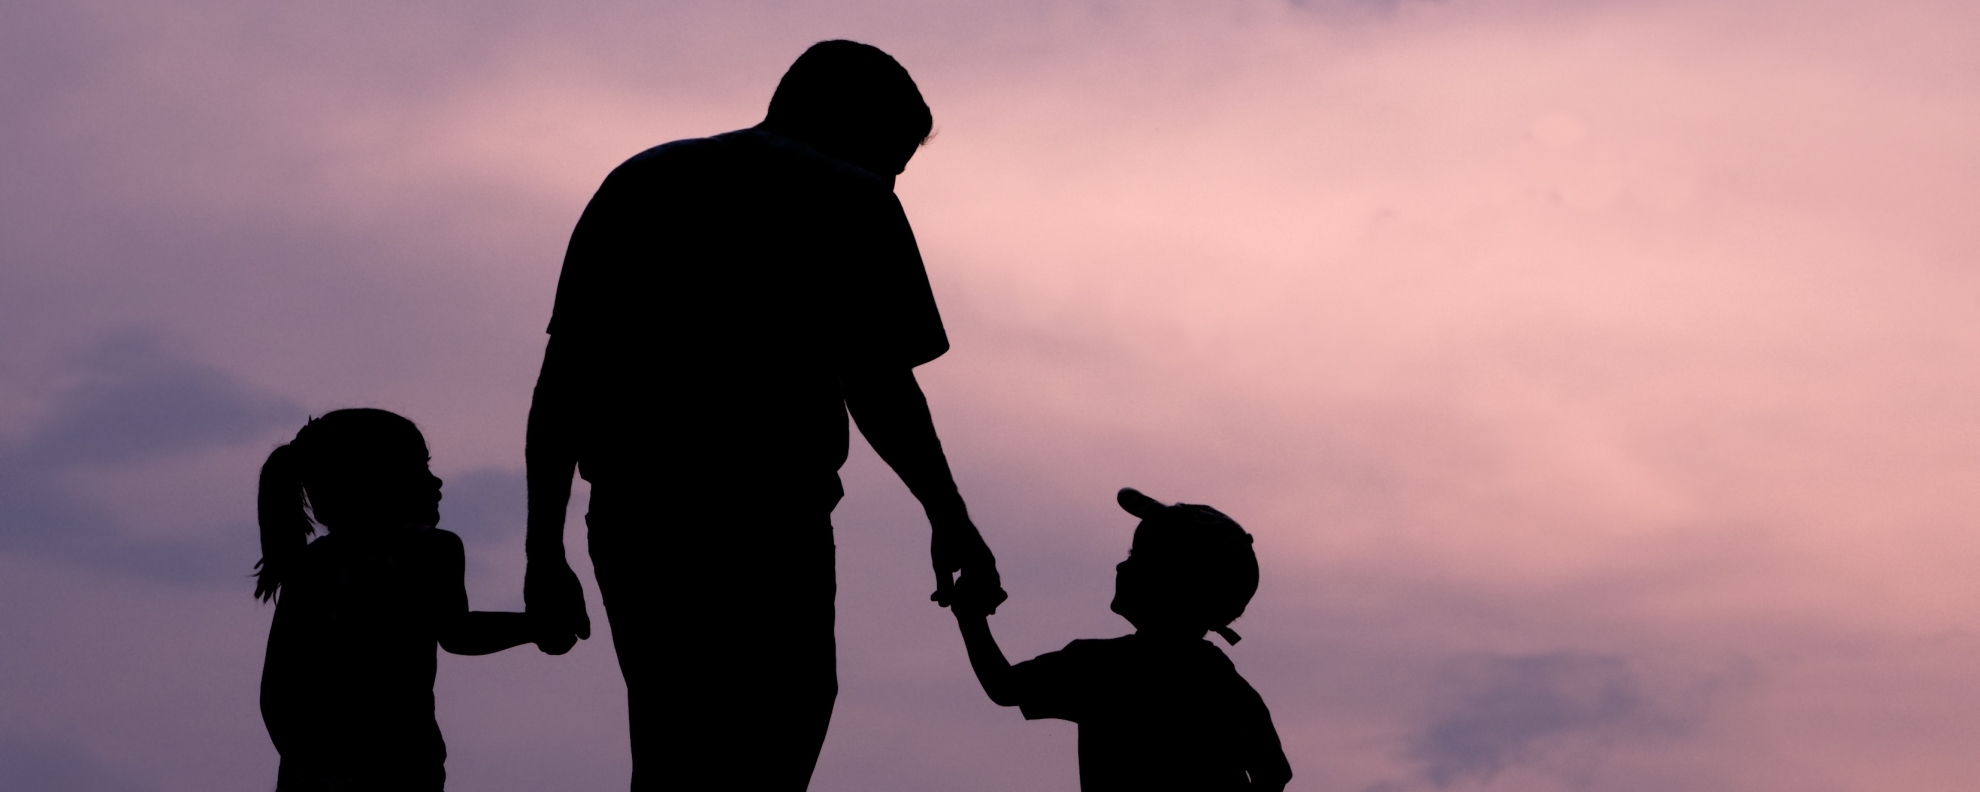 Silhouette of father walking with two kids against pink and purple sky